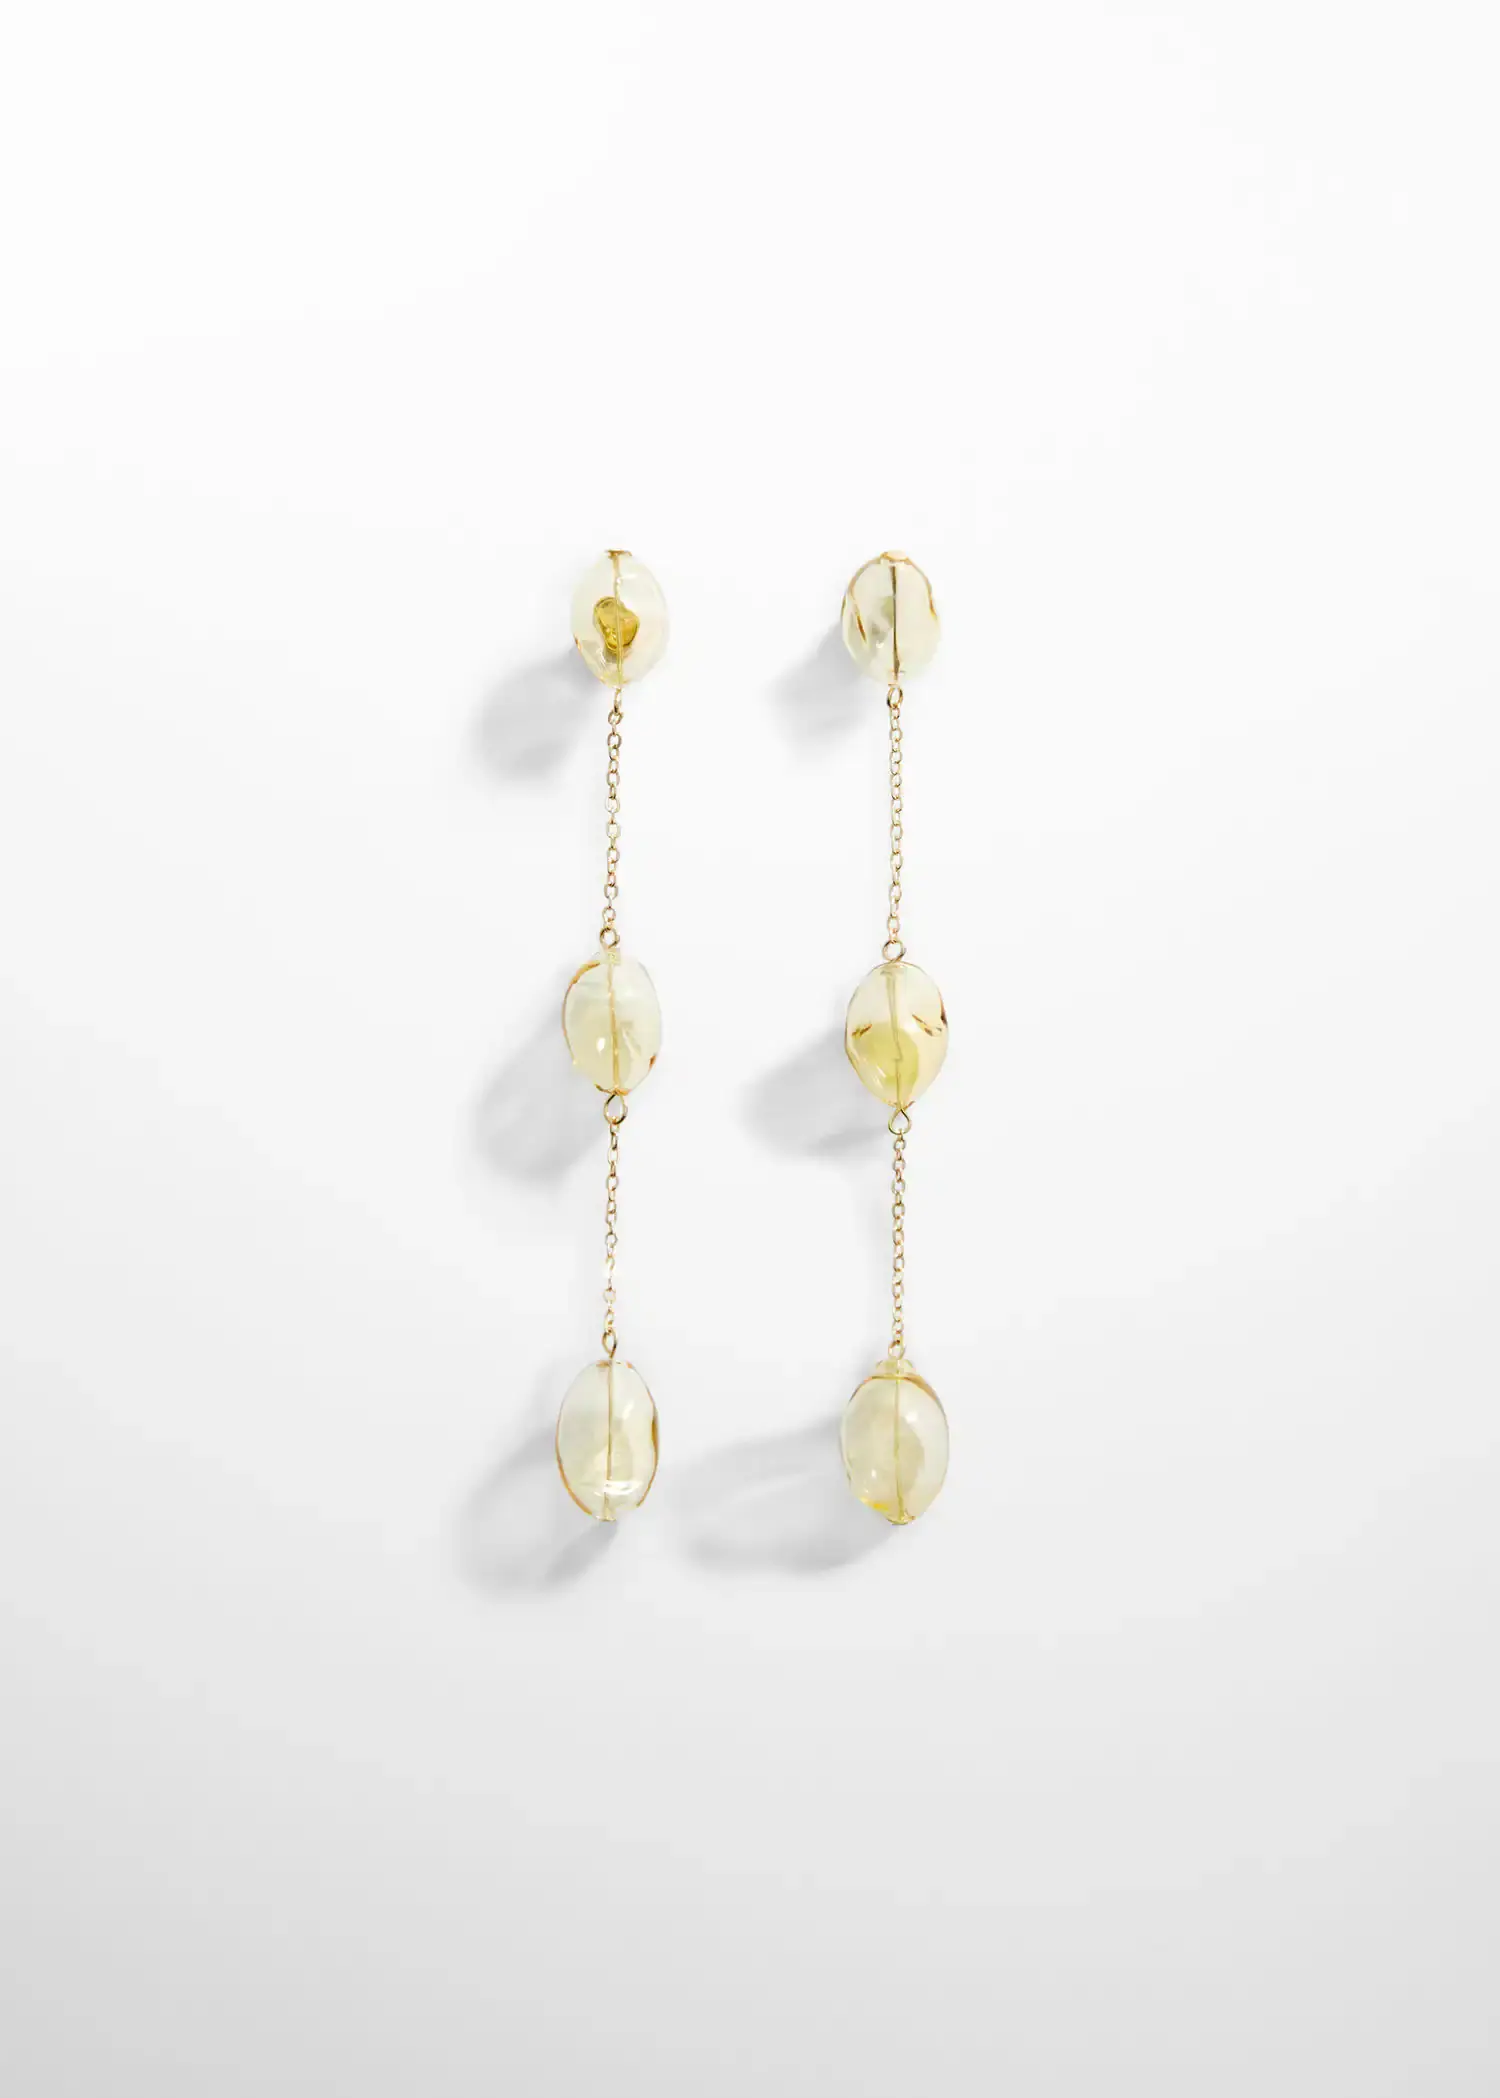 Mango Crystal thread earrings. a pair of earrings hanging from a chain. 